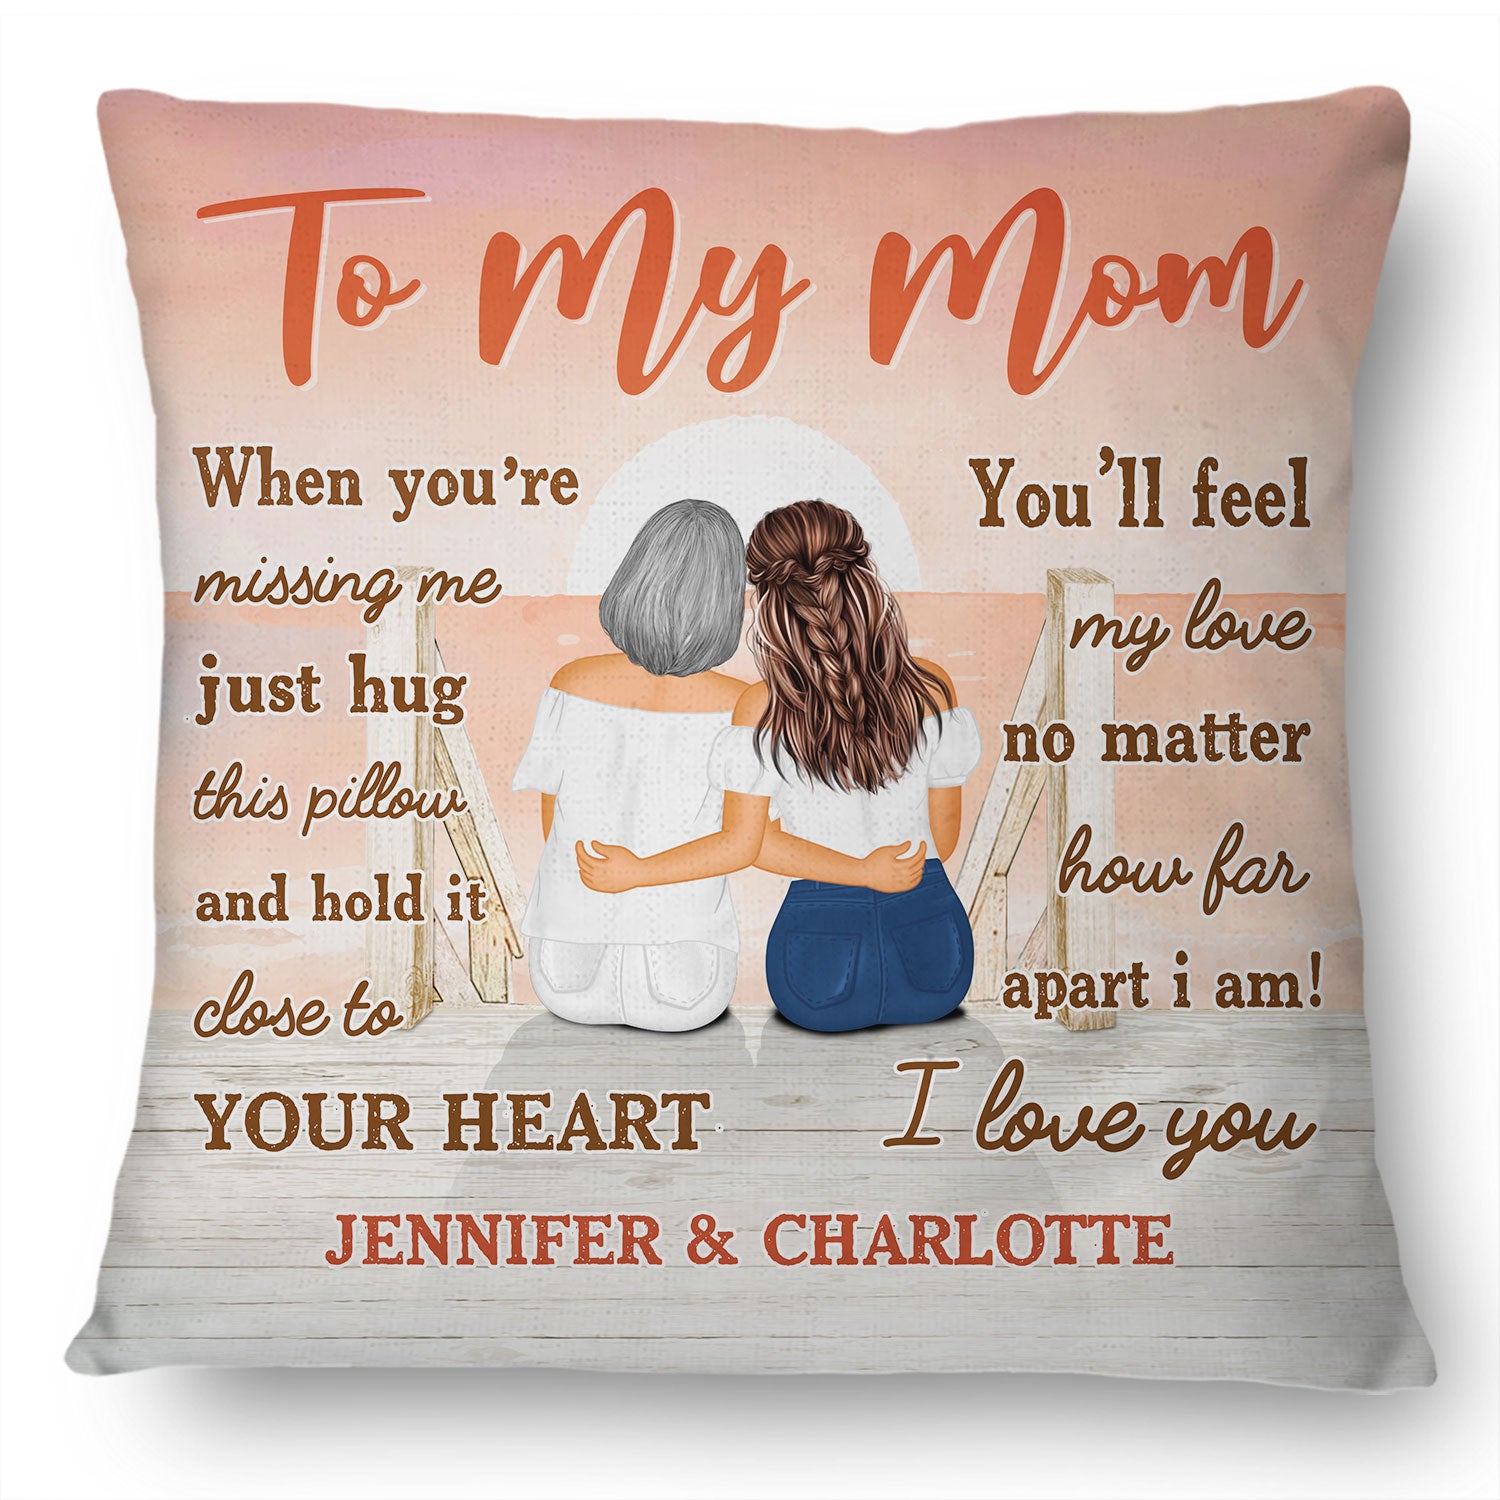 Just Hug This Pillow When You're Missing Me - Gift For Mother - Personalized Custom Pillow